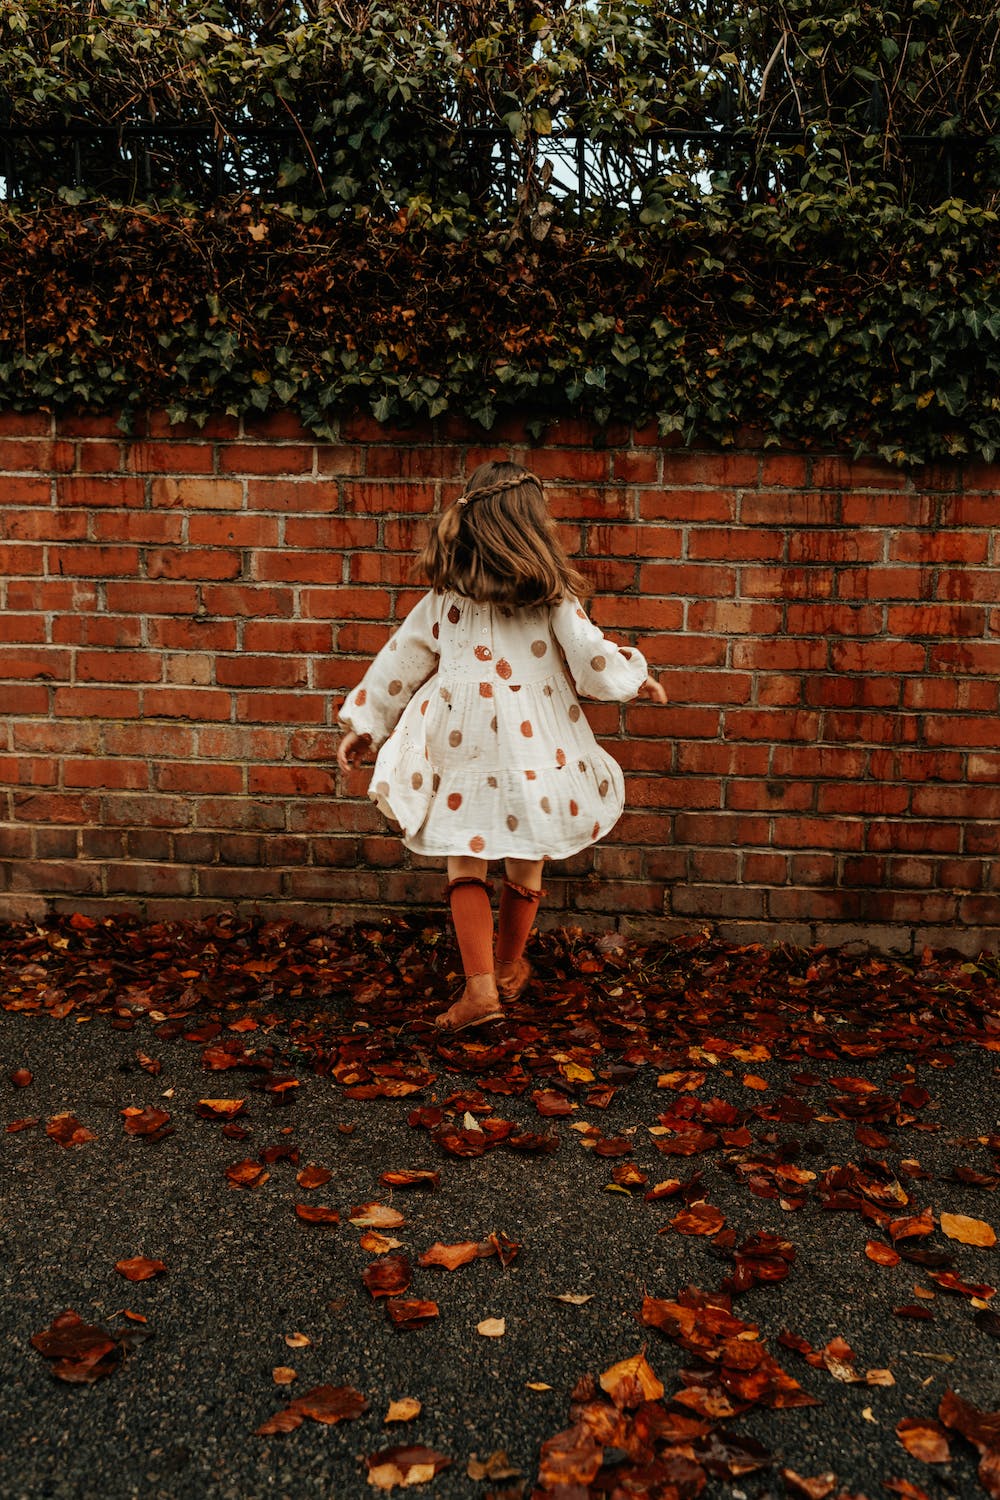 free-photo-of-little-girl-standing-in-front-of-a-brick-wall-in-autumn.jpeg